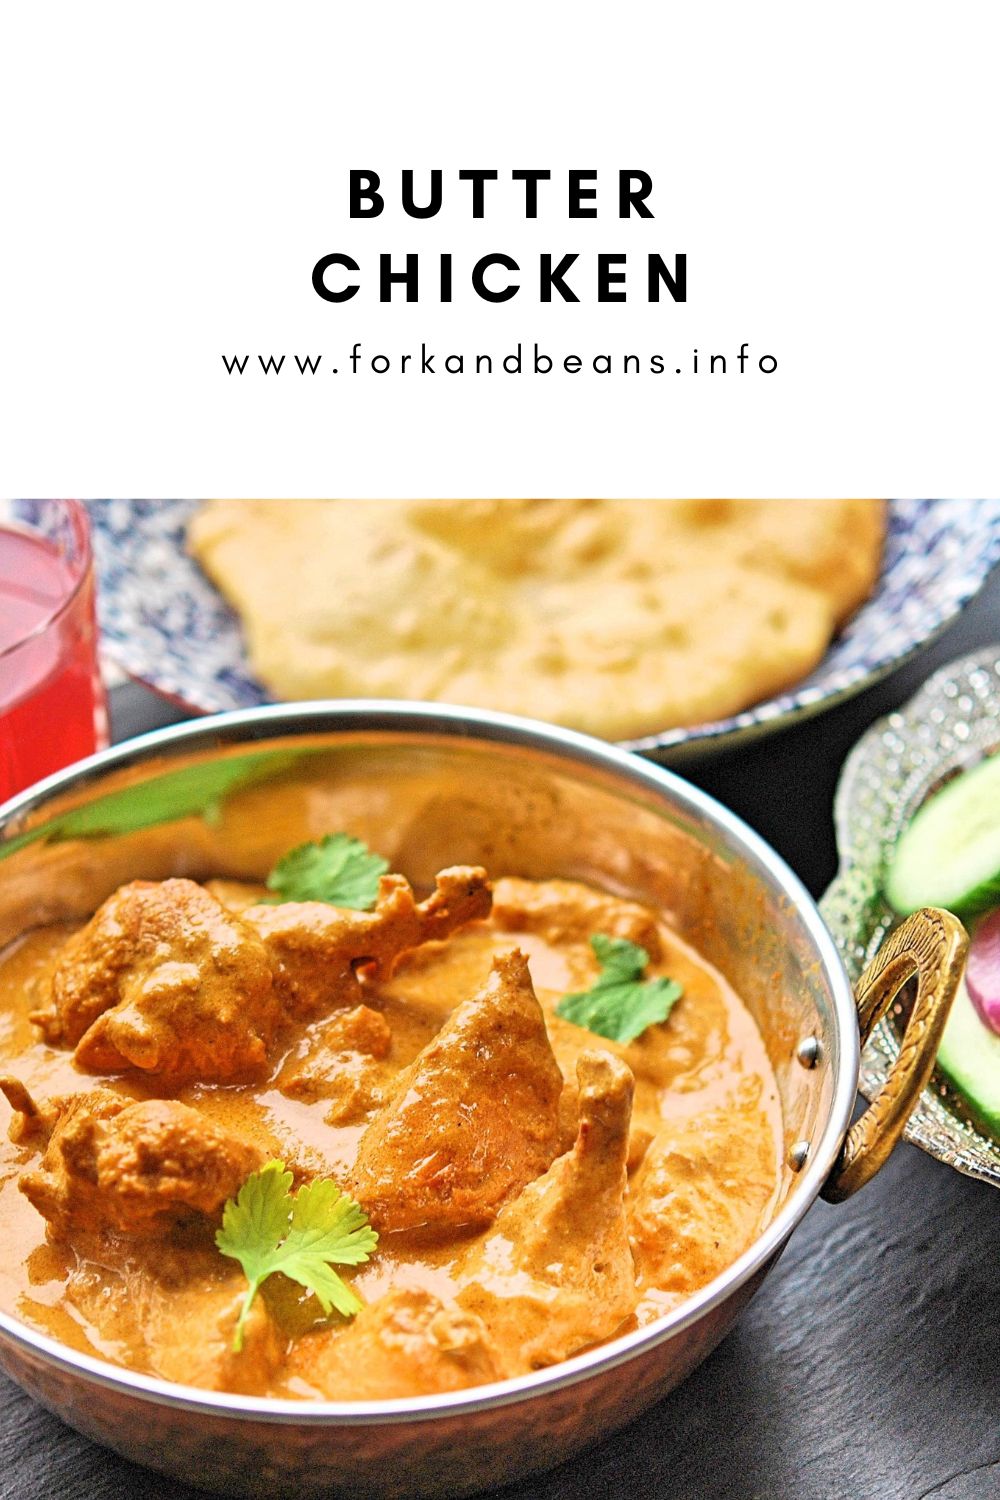 BUTTER CHICKEN RECIPE – STEP BY STEP